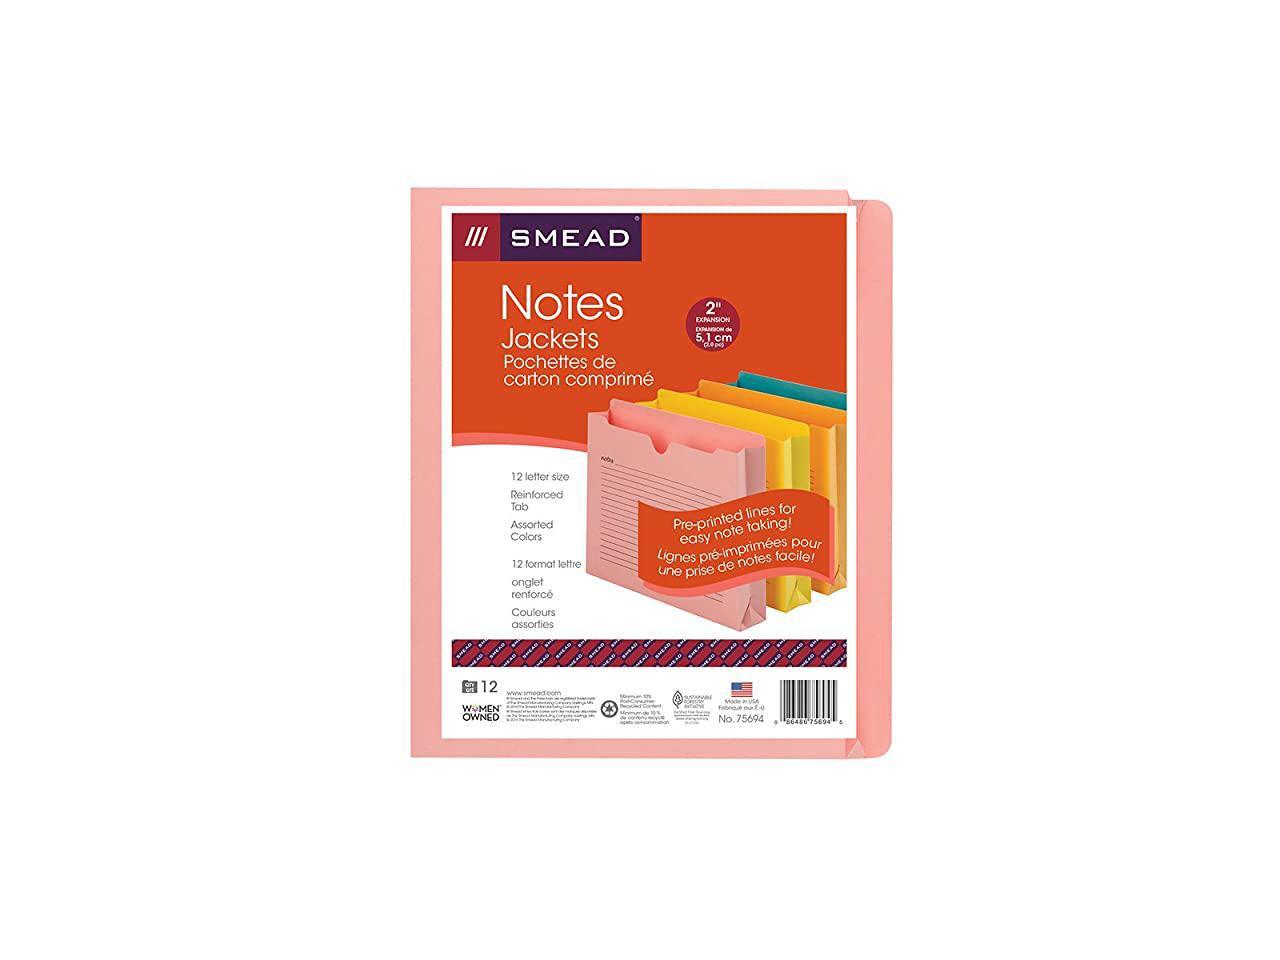 Smead Notes File Jacket Letter Size 12 Per Pack 75694 Assorted Colors 2 Expansion